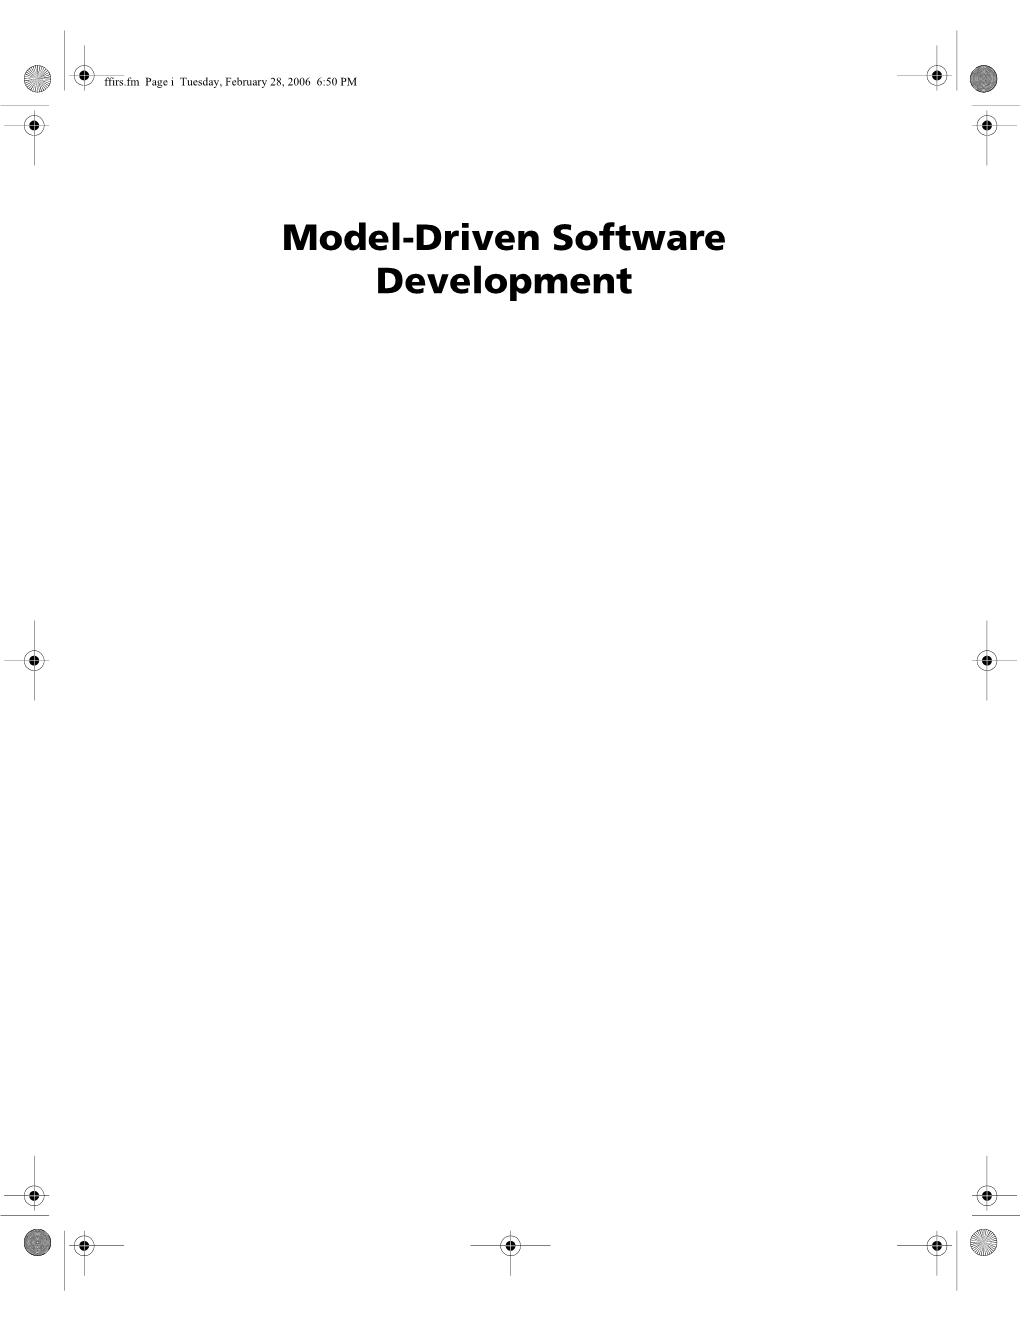 Model-Driven Software Development (MDSD) Puts Analysis and Design Models on Par with Code